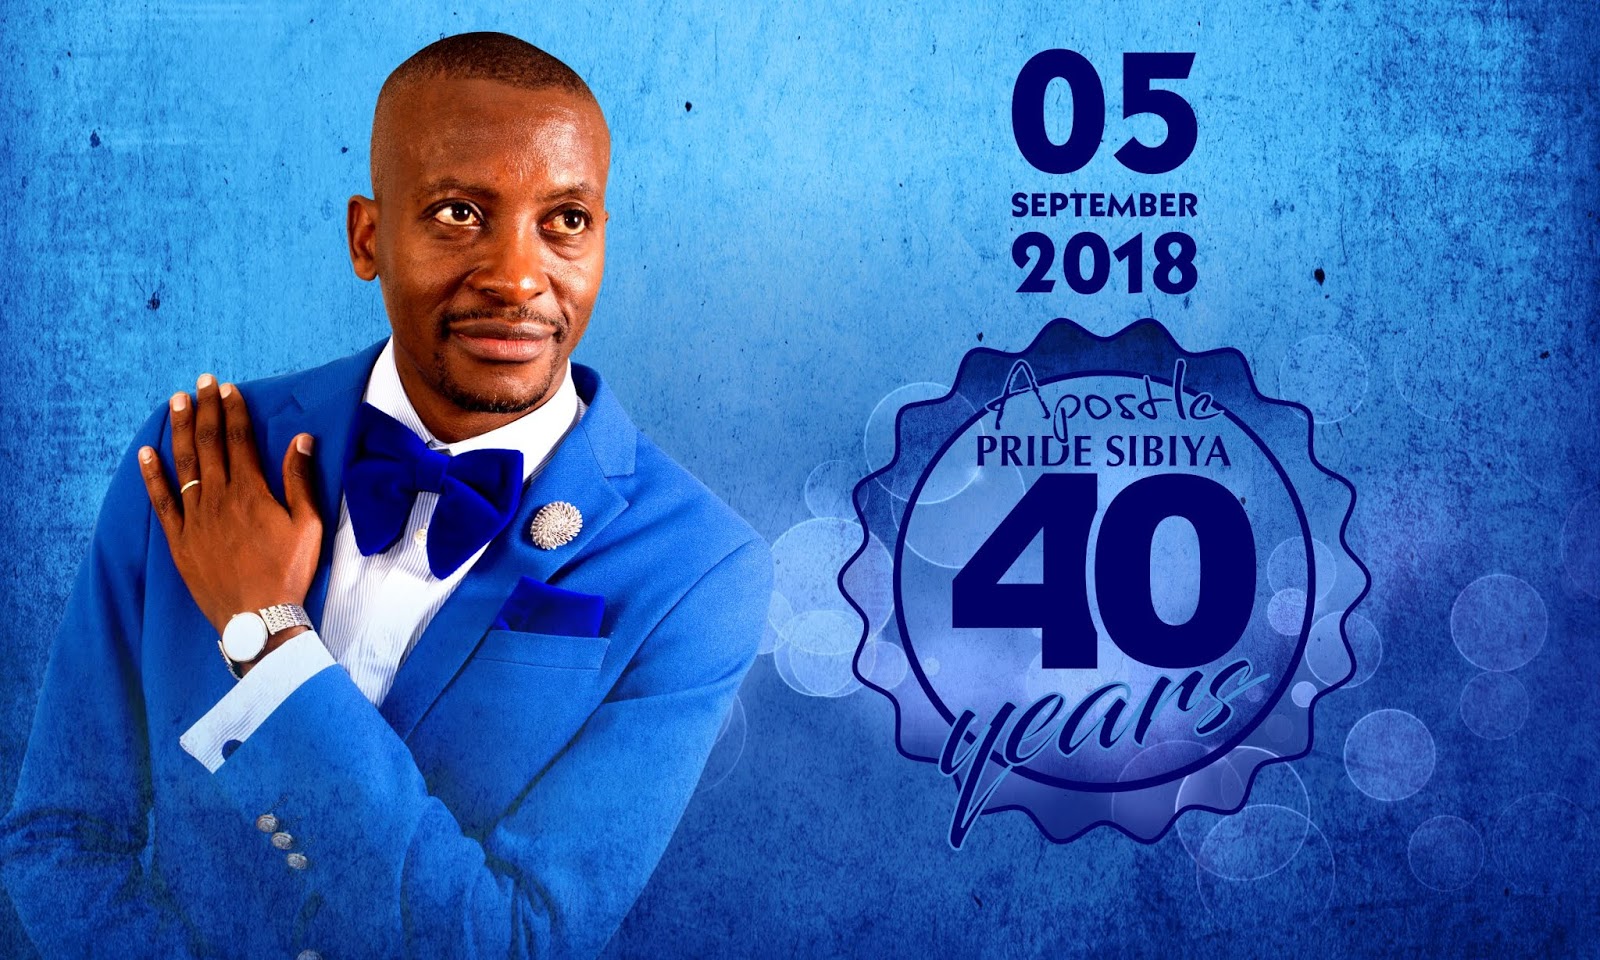 The Significance Of 40 Years To Apostle Pride Sibiya 